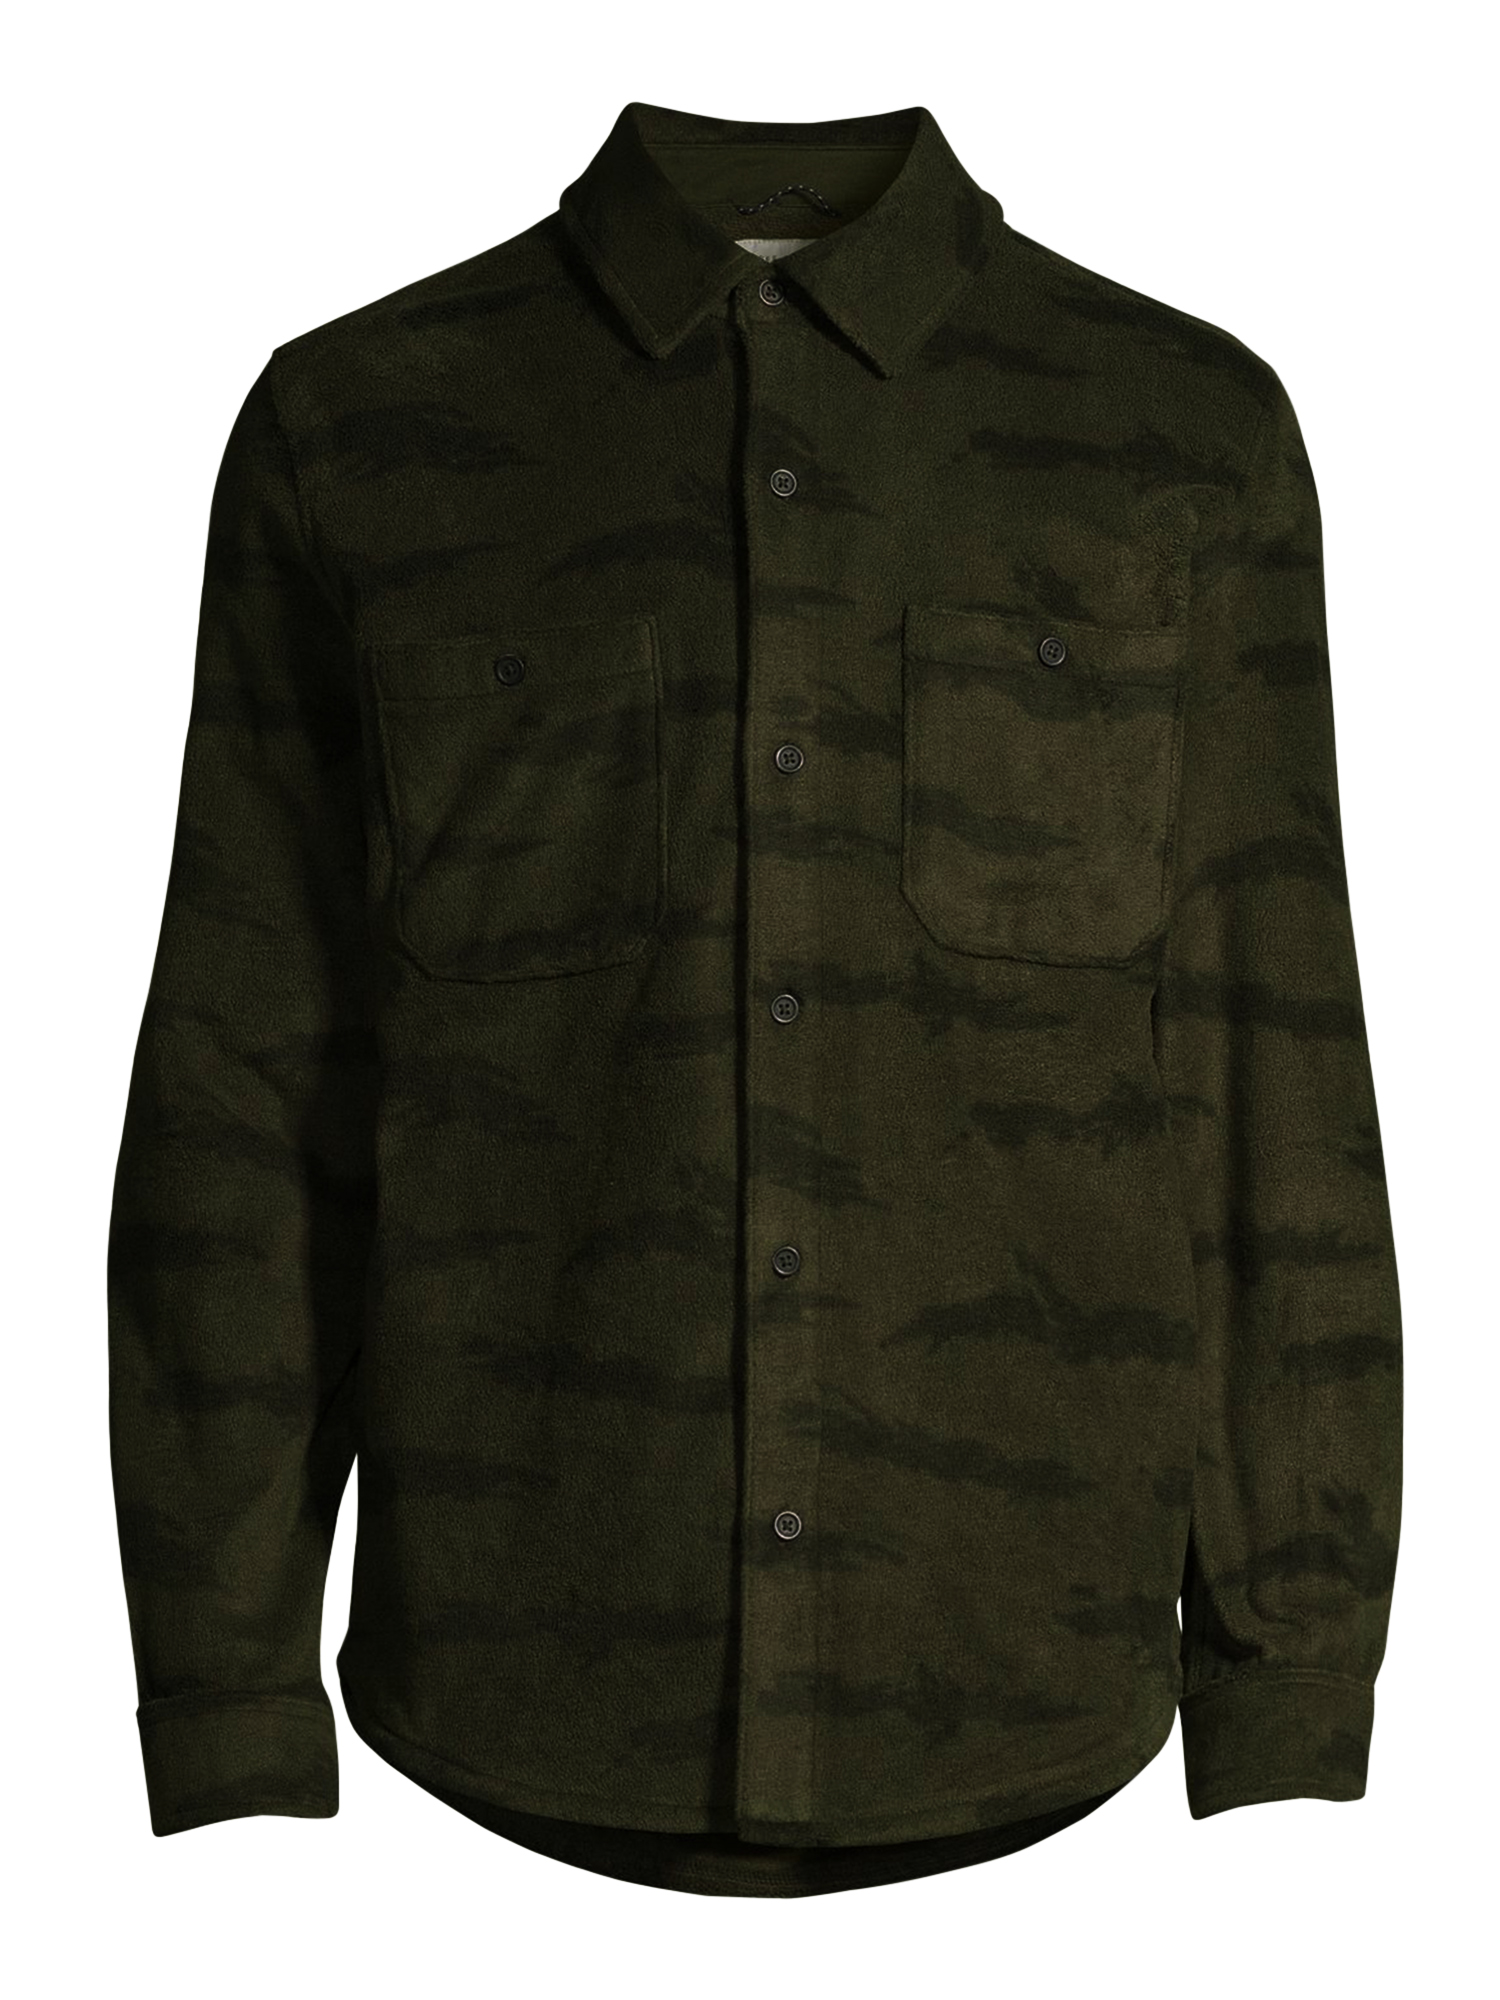 Free Assembly Men's Fleece Shirt with Two Pockets - image 3 of 6